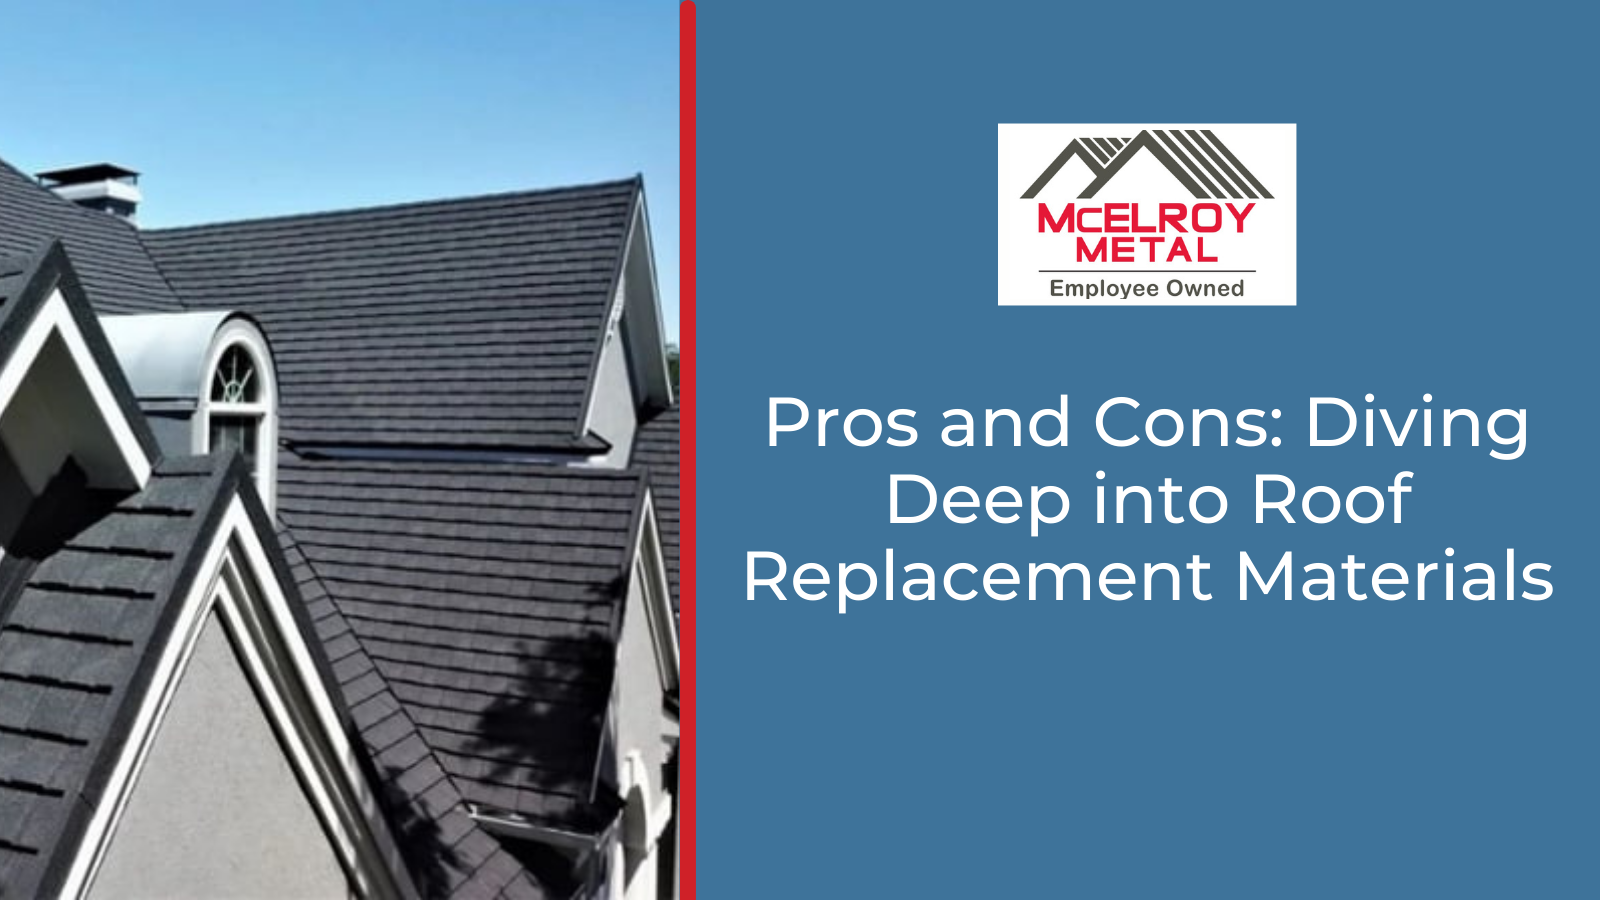 Pros and Cons: Diving Deep into Roof Replacement Materials